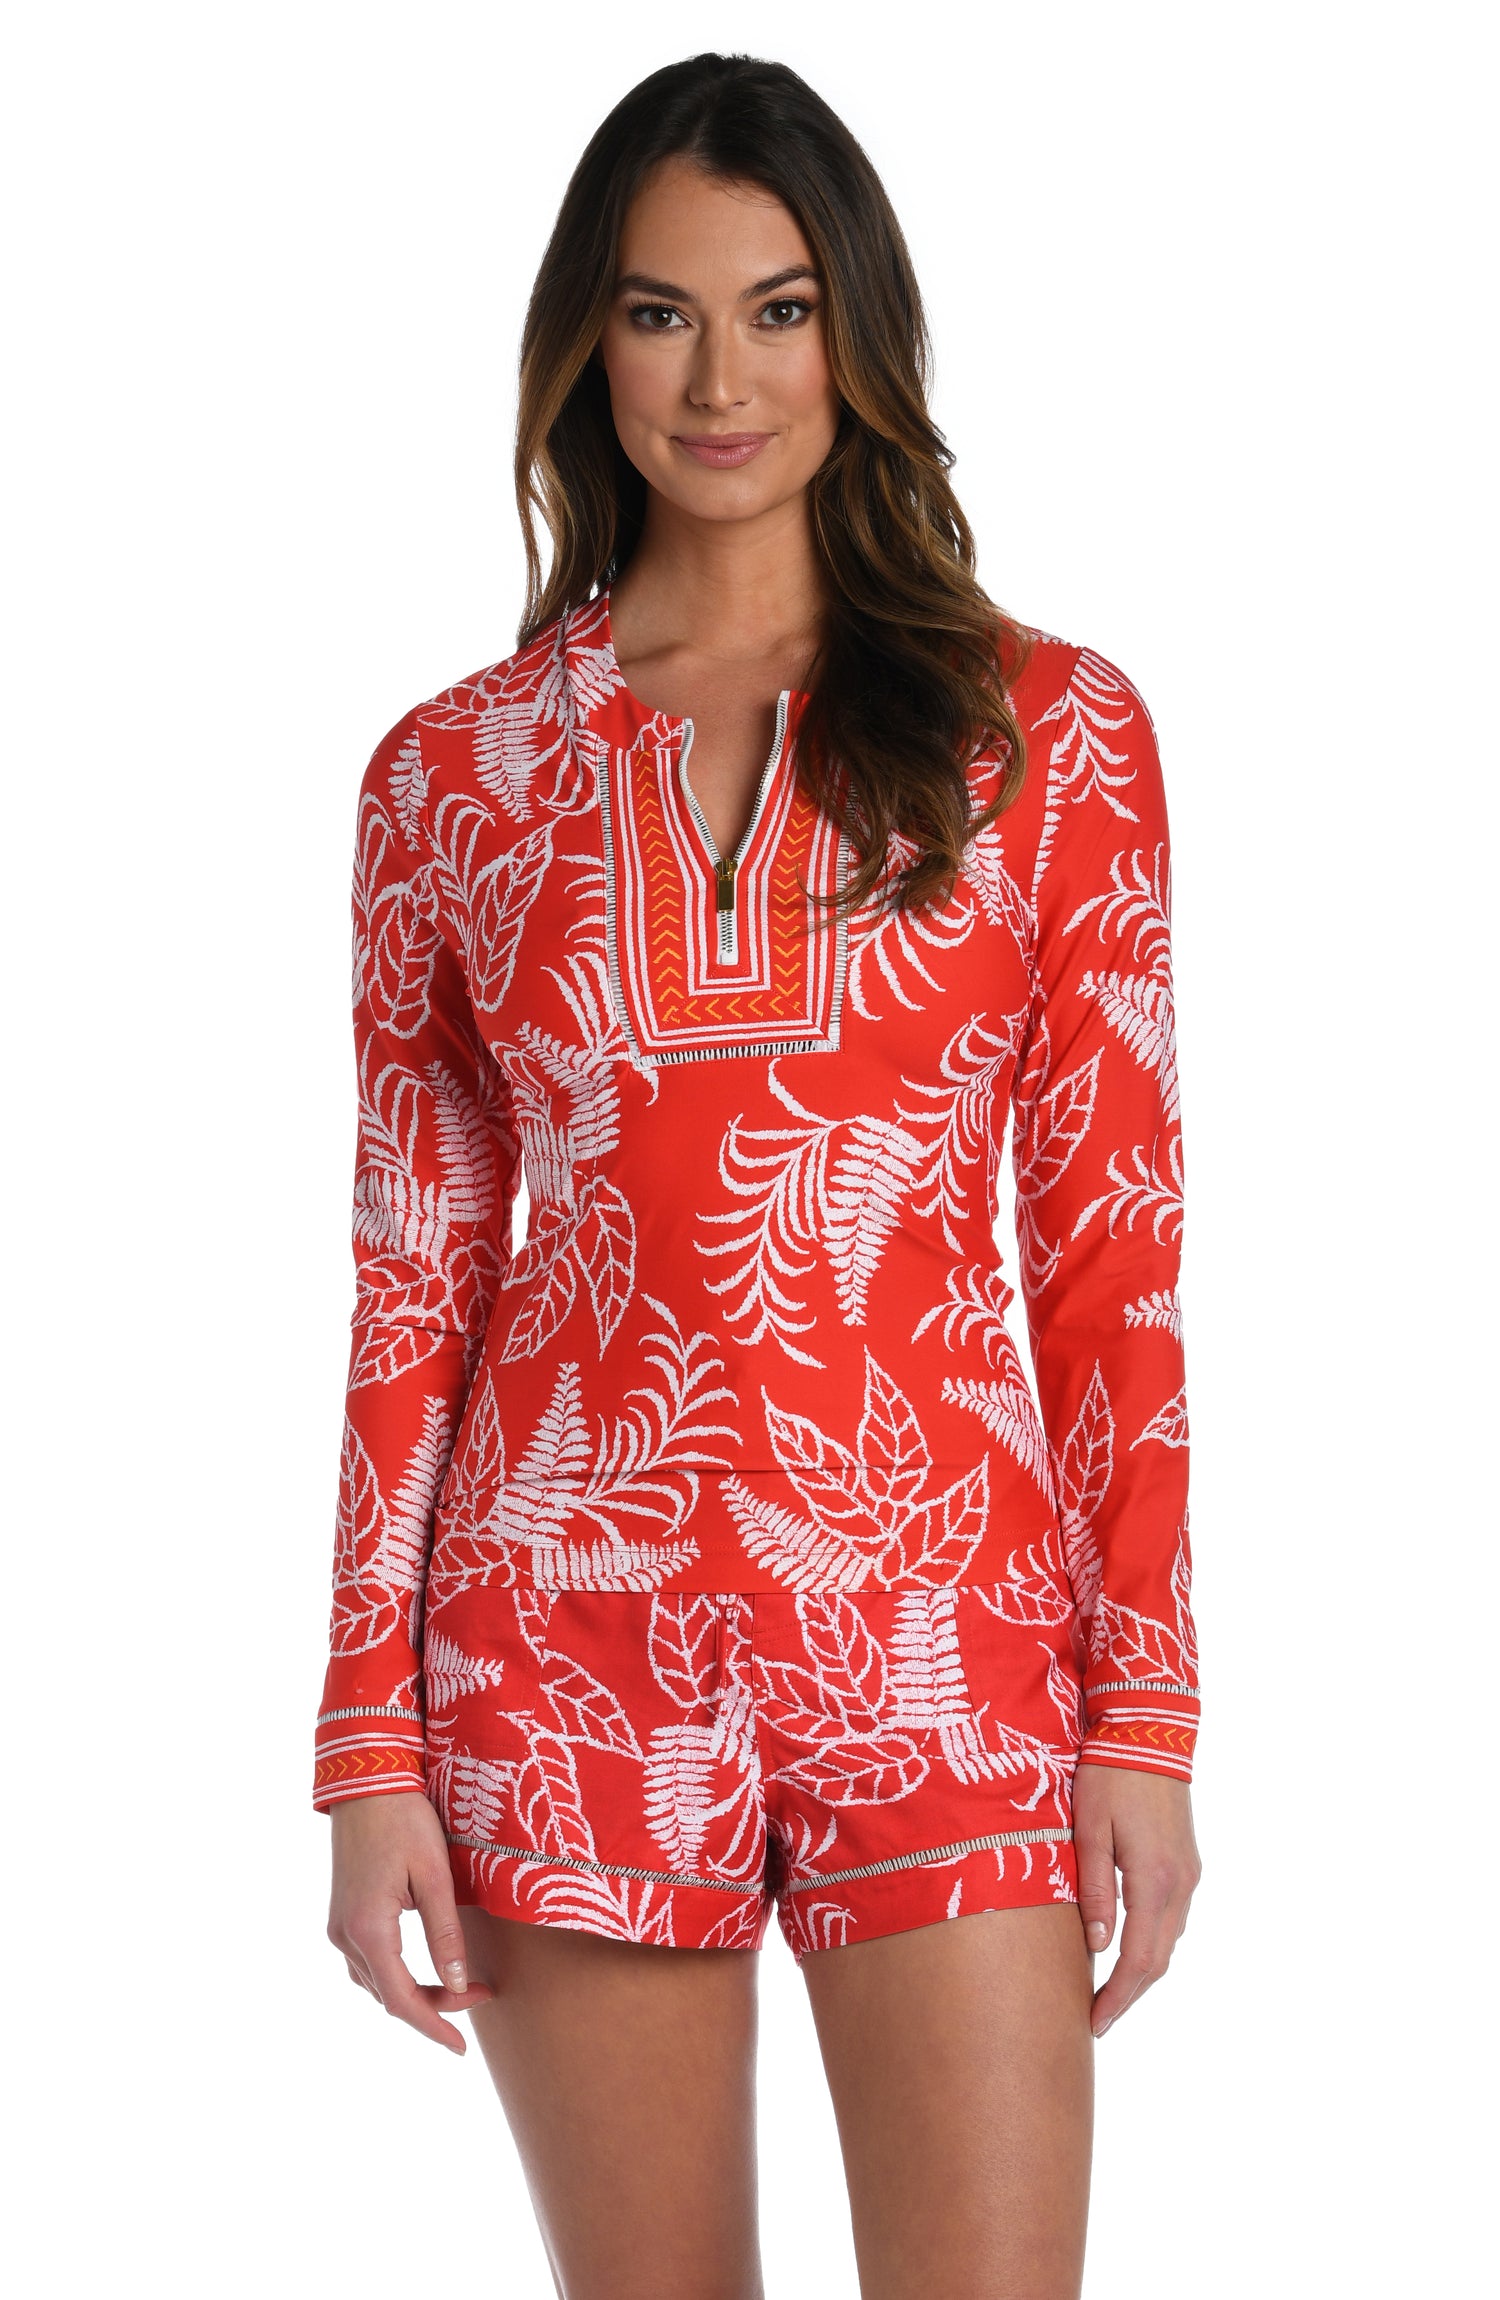 Model is wearing cherry red tropical printed half zip rashguard top up from our Tropical Tapestry collection!